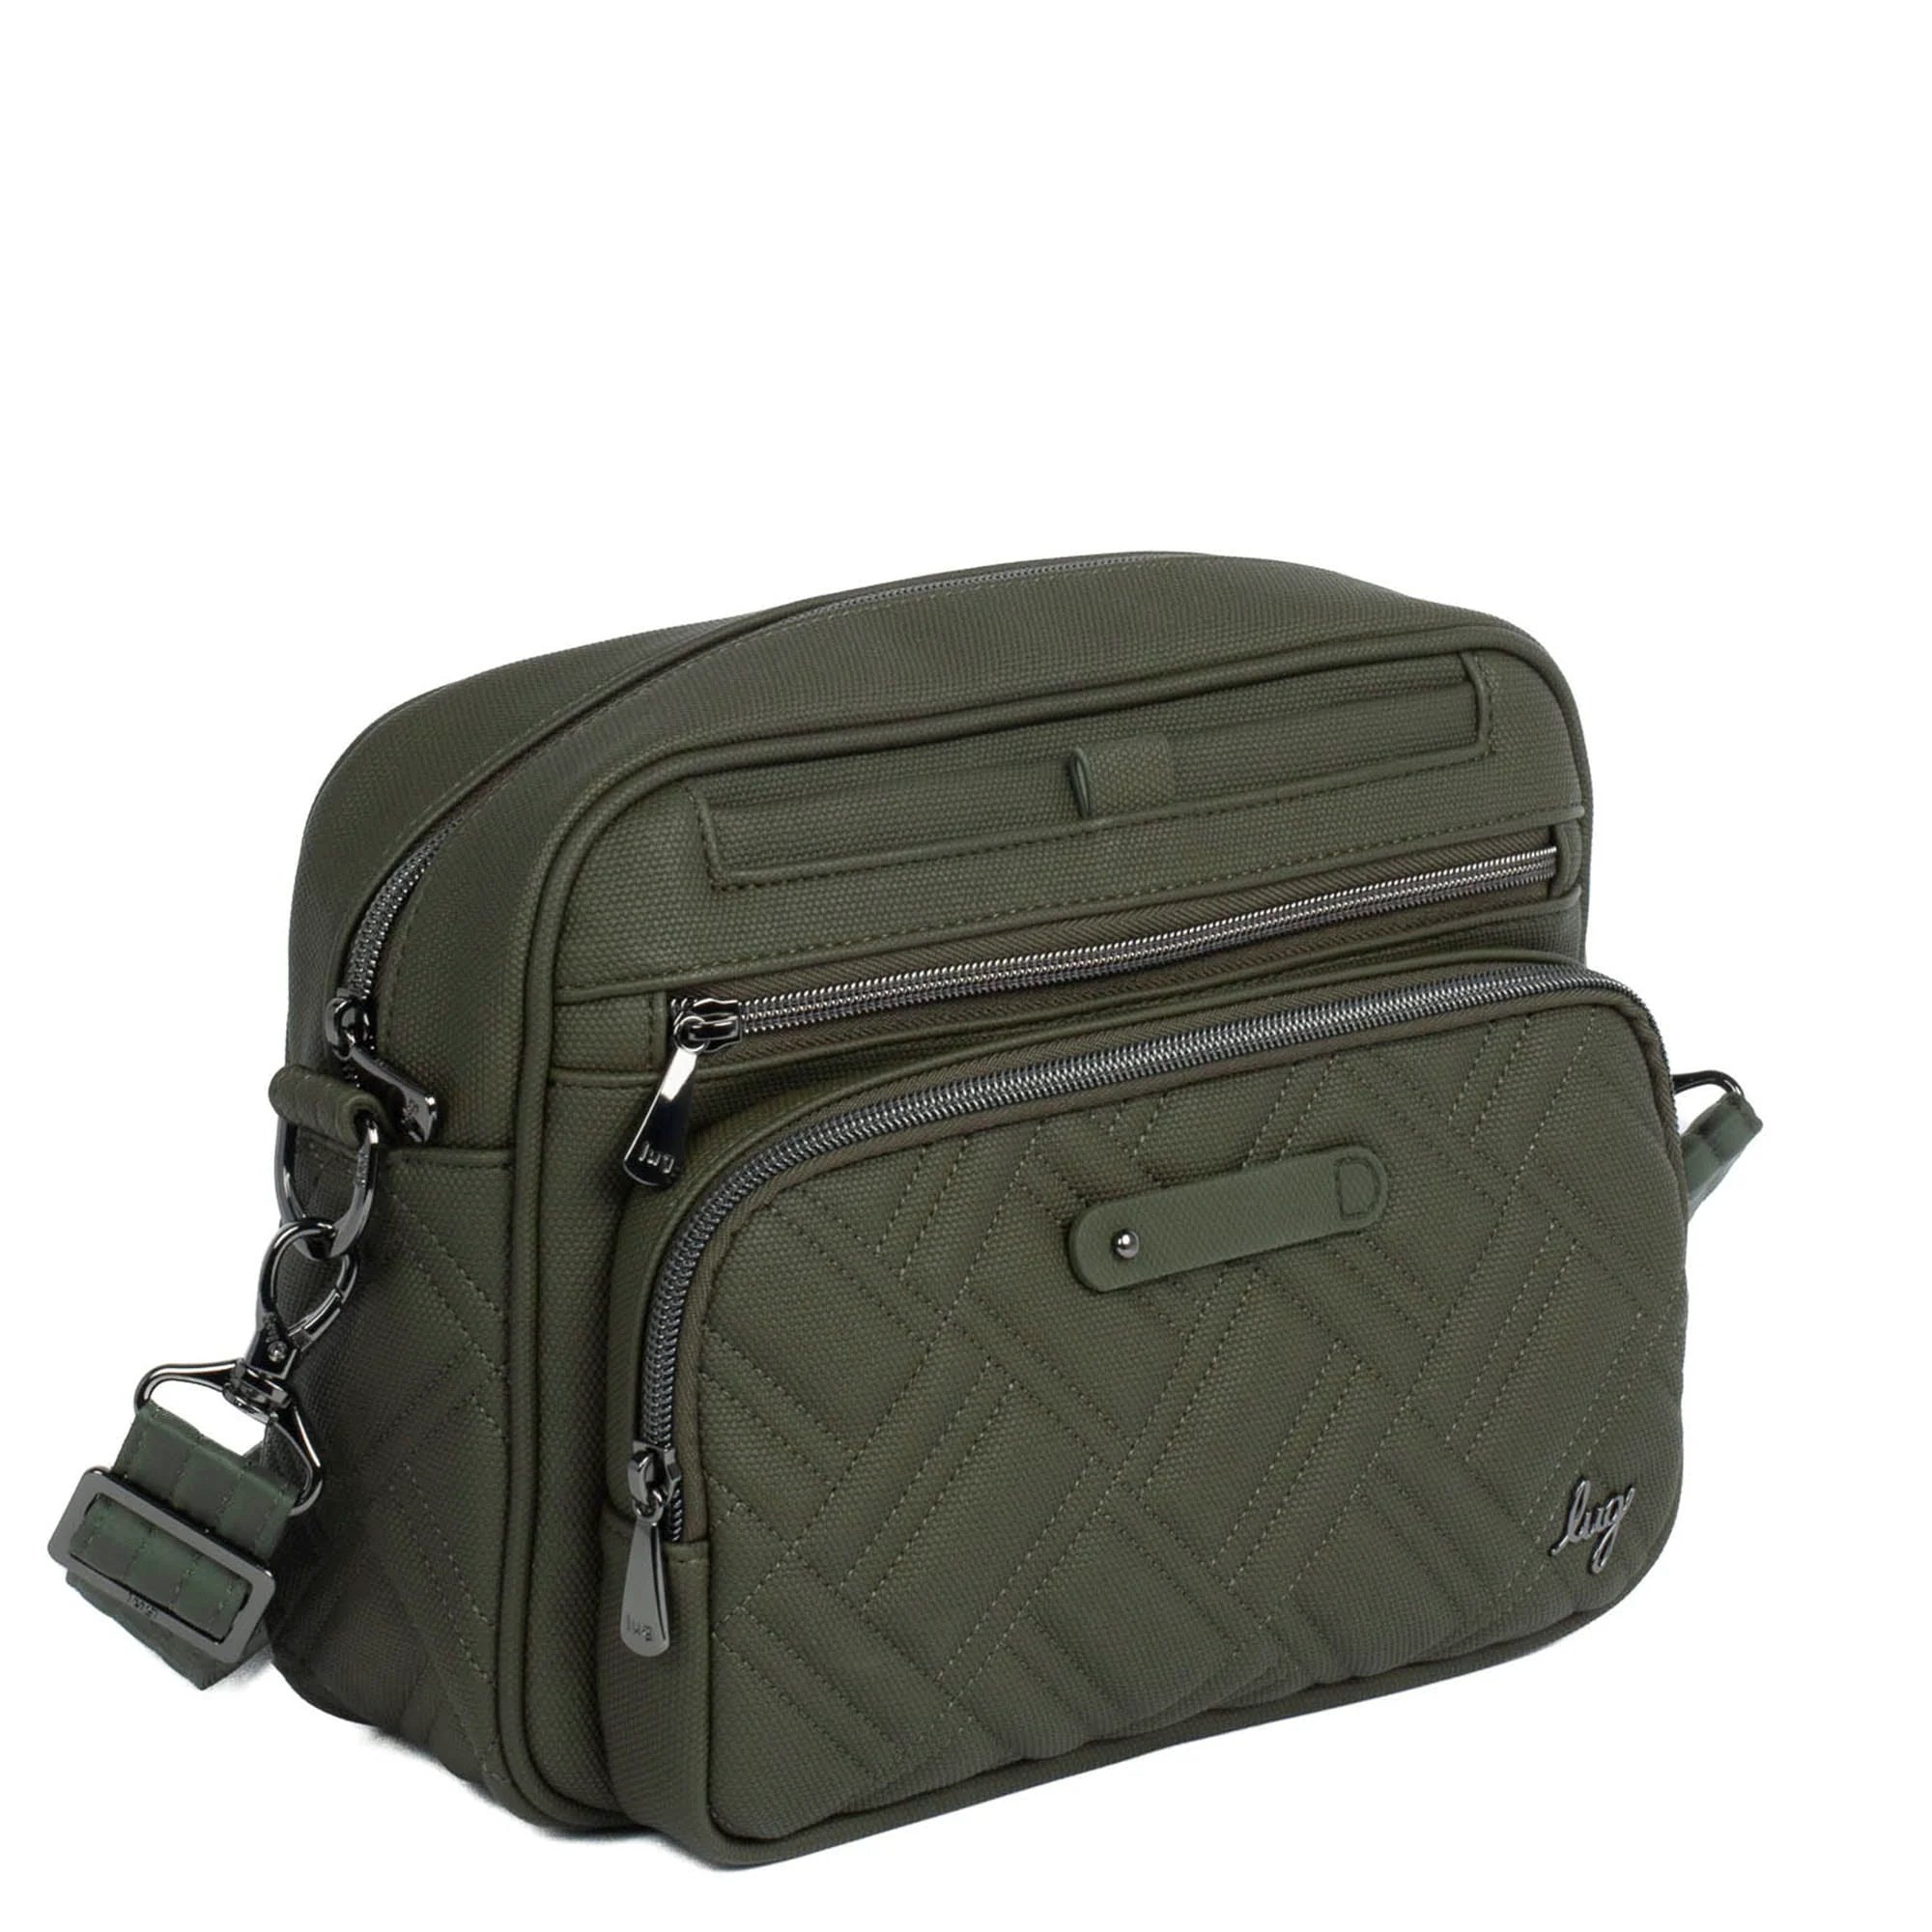 Carousel XL Matte Luxe- Olive Green